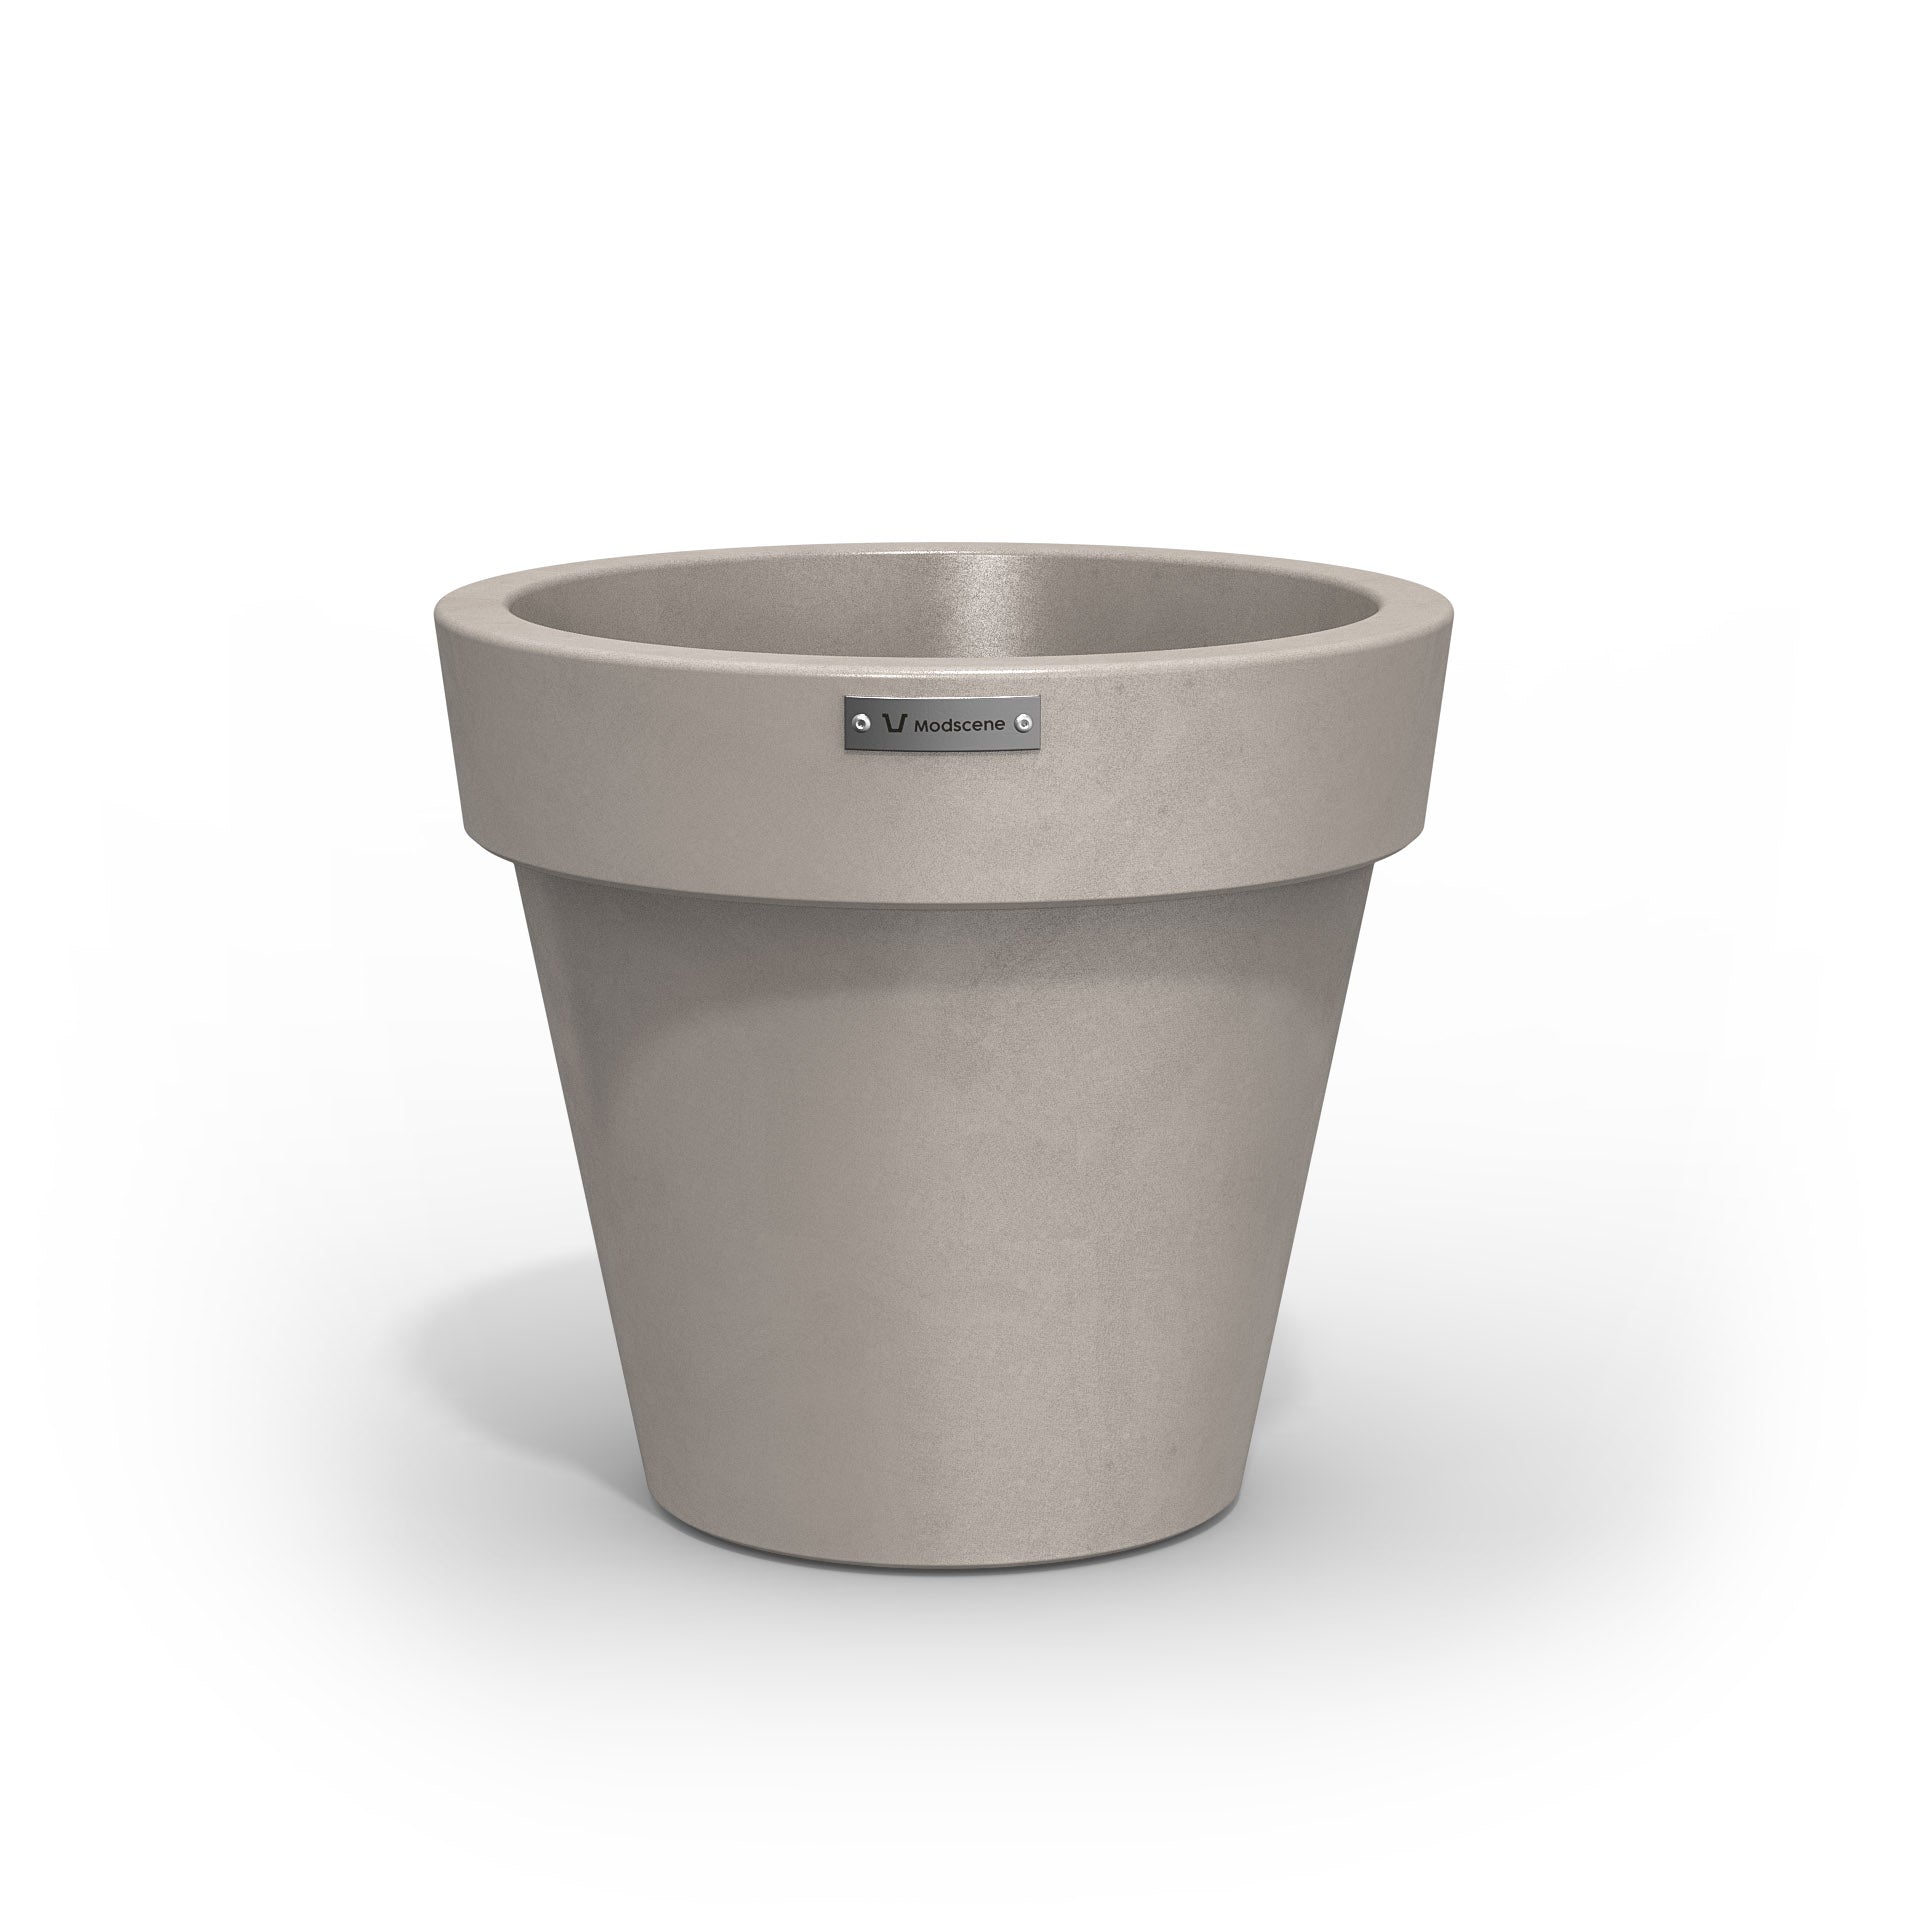 A small Modscene planter pot made in sandstone with a concrete look finish.